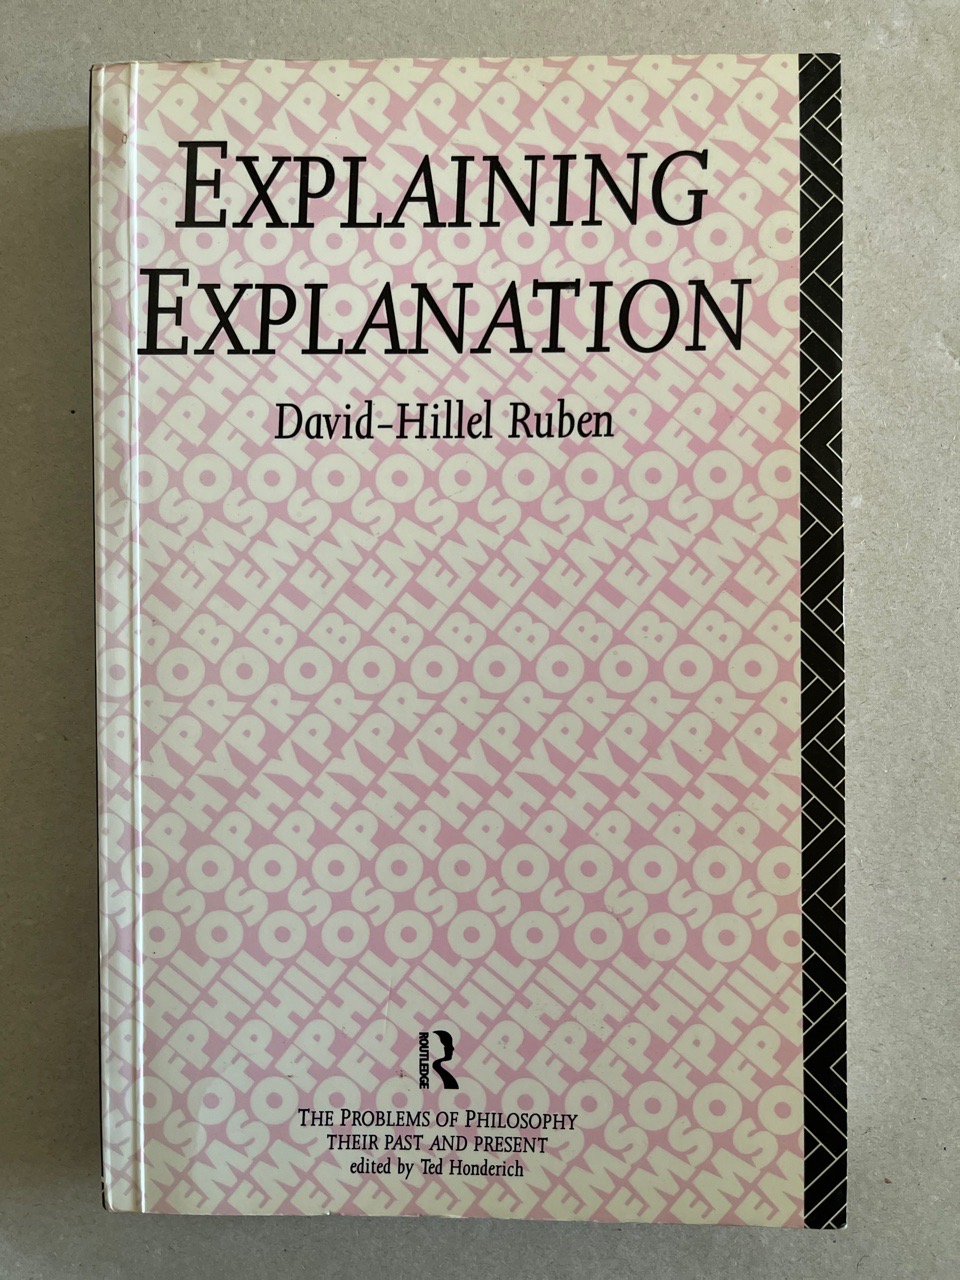 Explaining Explanation (The Problems of Philosophy : Their Past and Present). - Ruben, David-Hillel